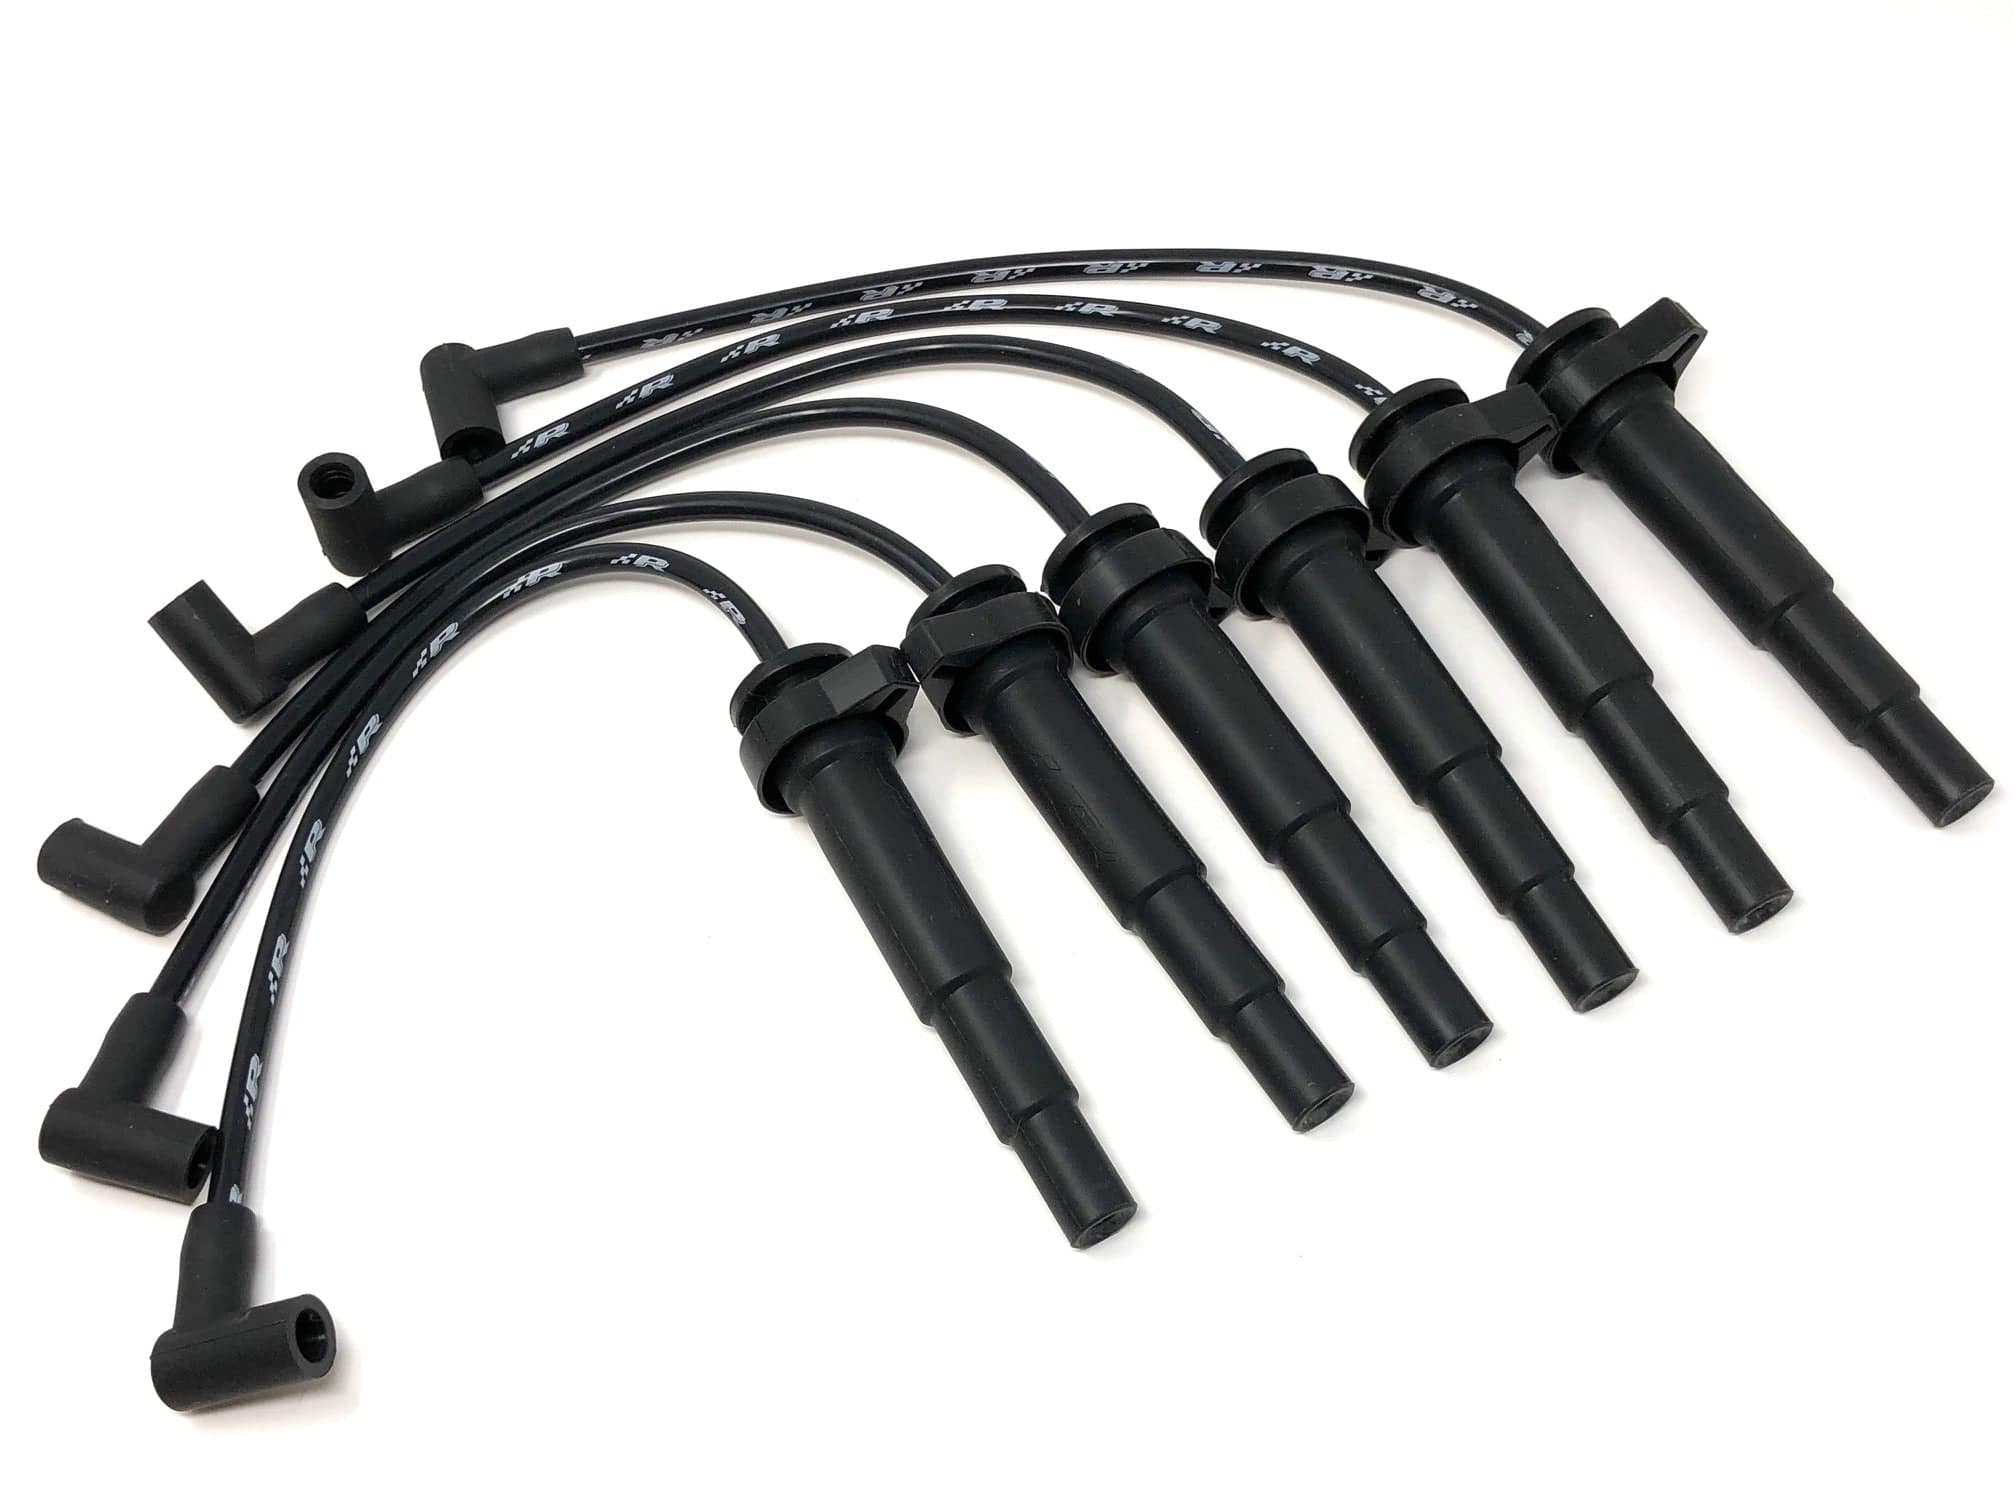 Kies-Motorsports Precision Raceworks BMW N54 Replacement Spark Plug Wires Black / Long (Manifold Location) / 6 Pack